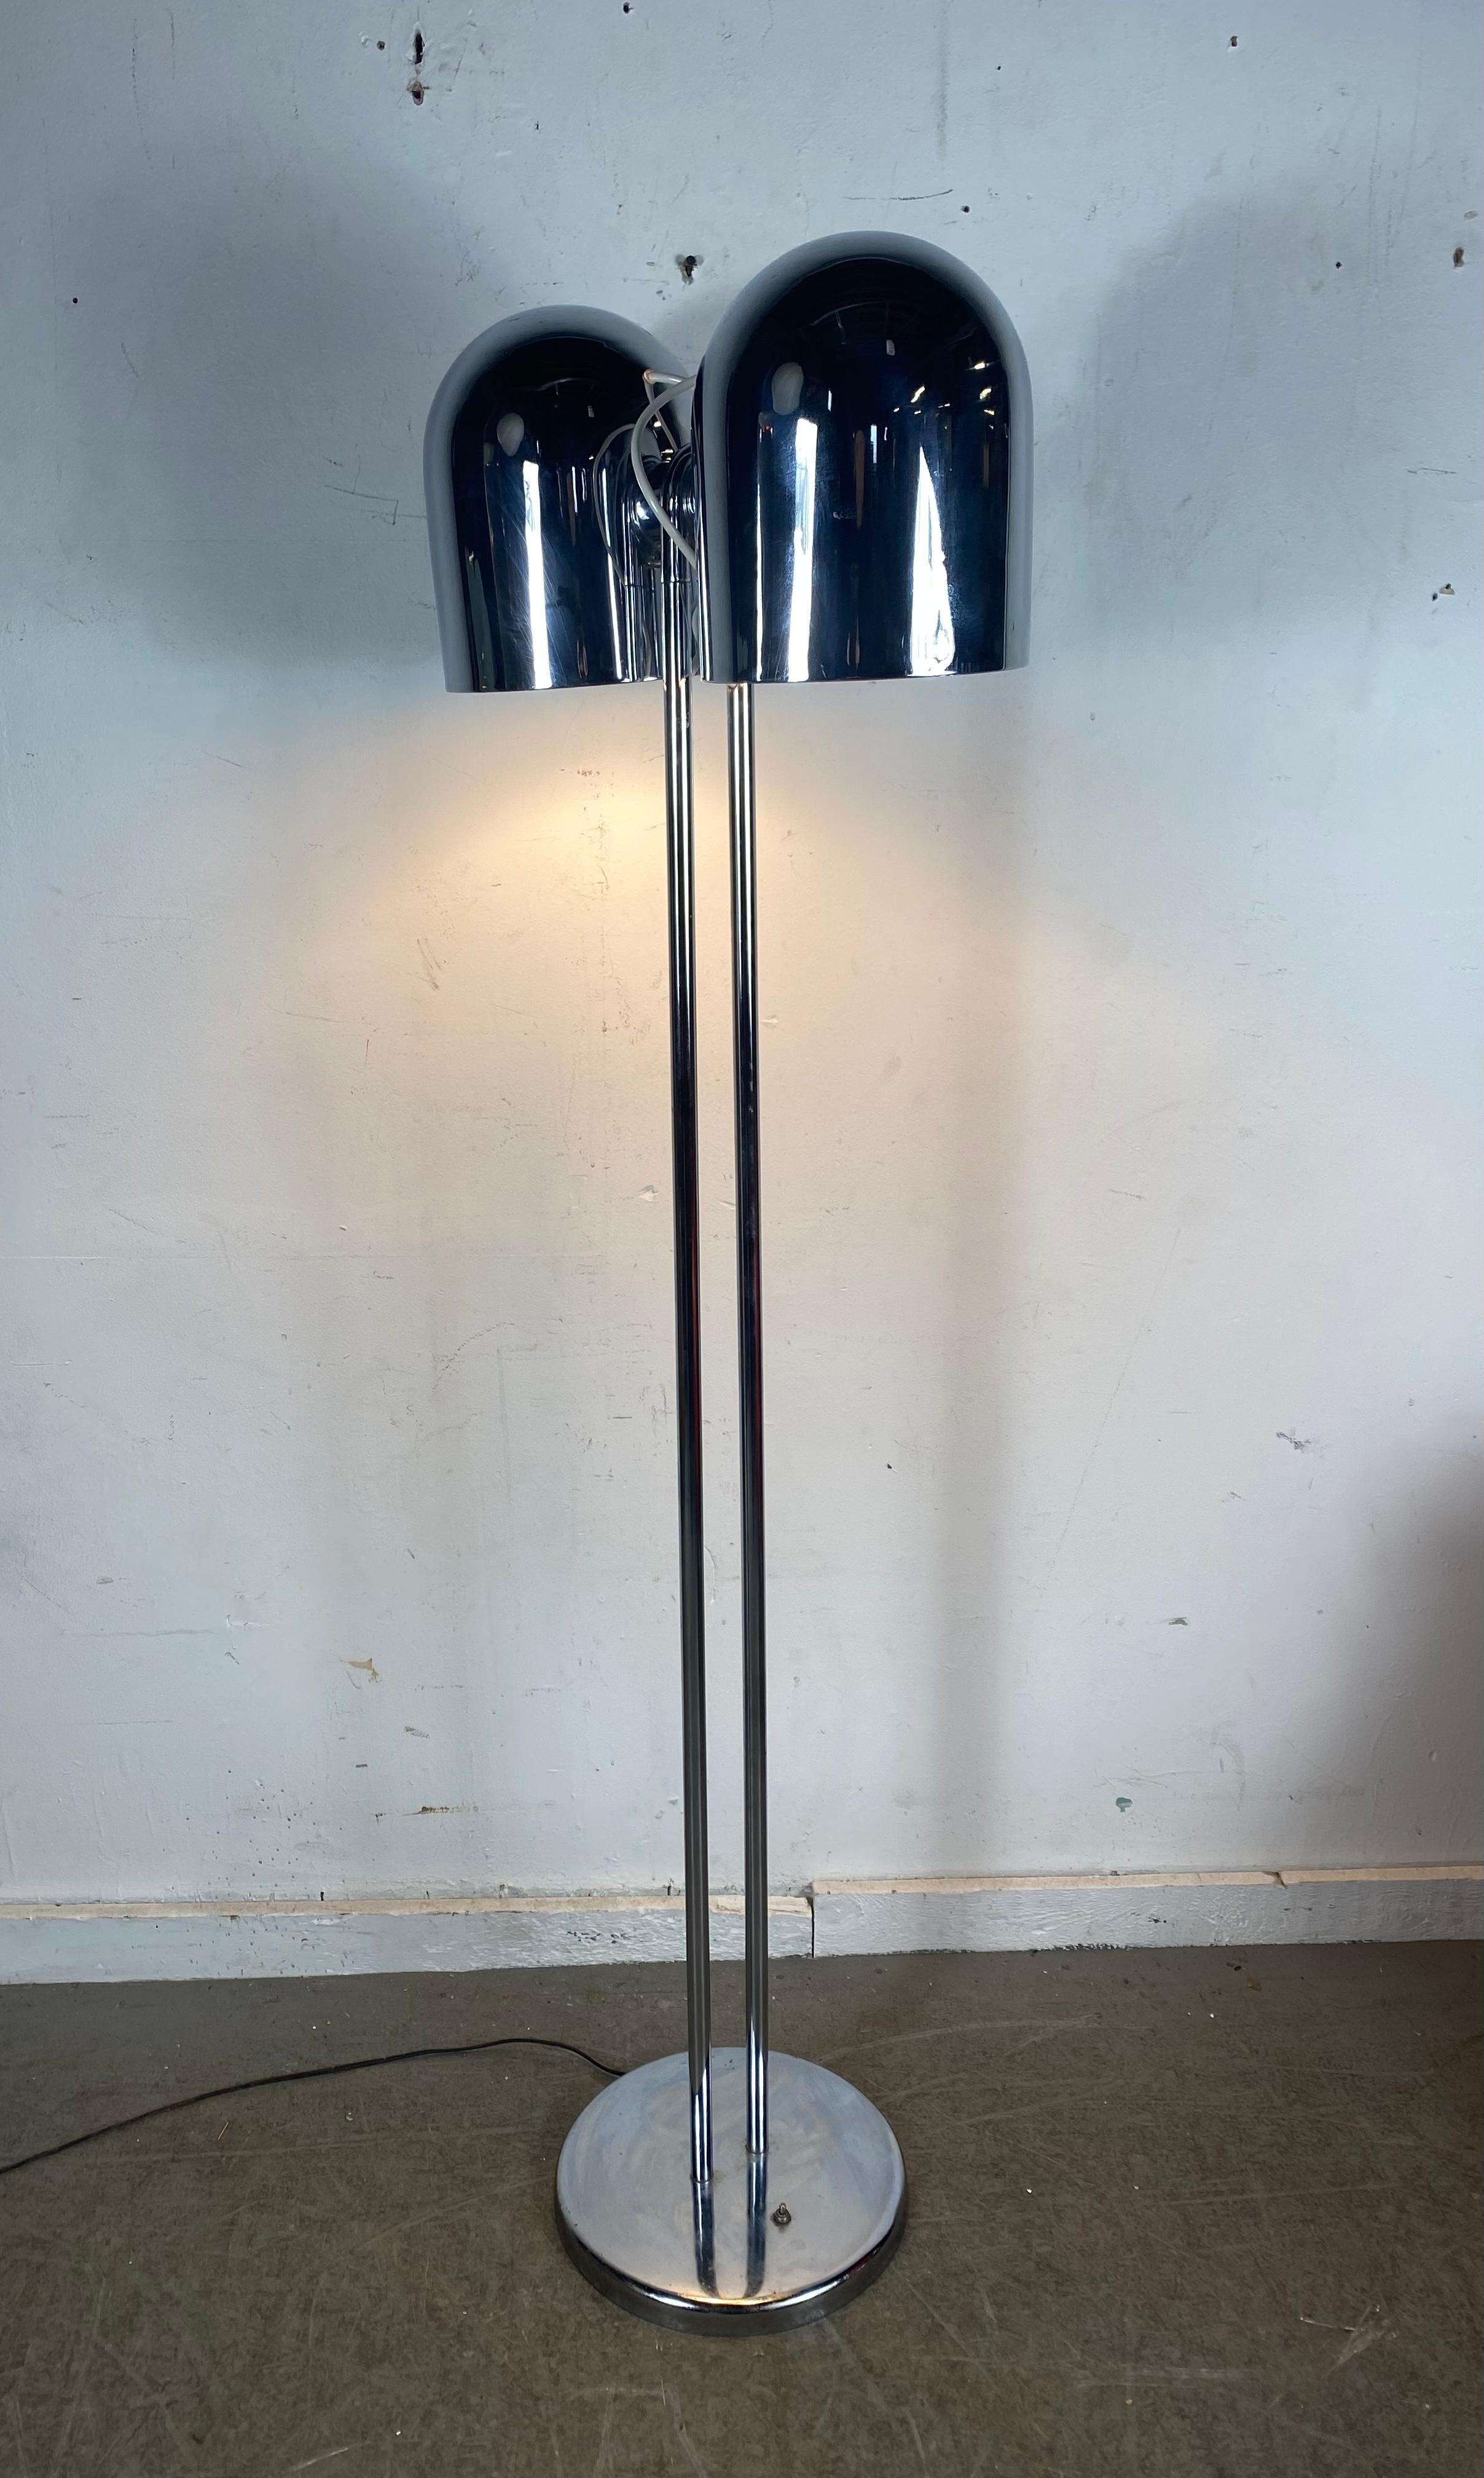 Italian, Mid-Century Modern / Spaceage  Chrome Floor Lamp by Robert Sonneman In Good Condition For Sale In Buffalo, NY